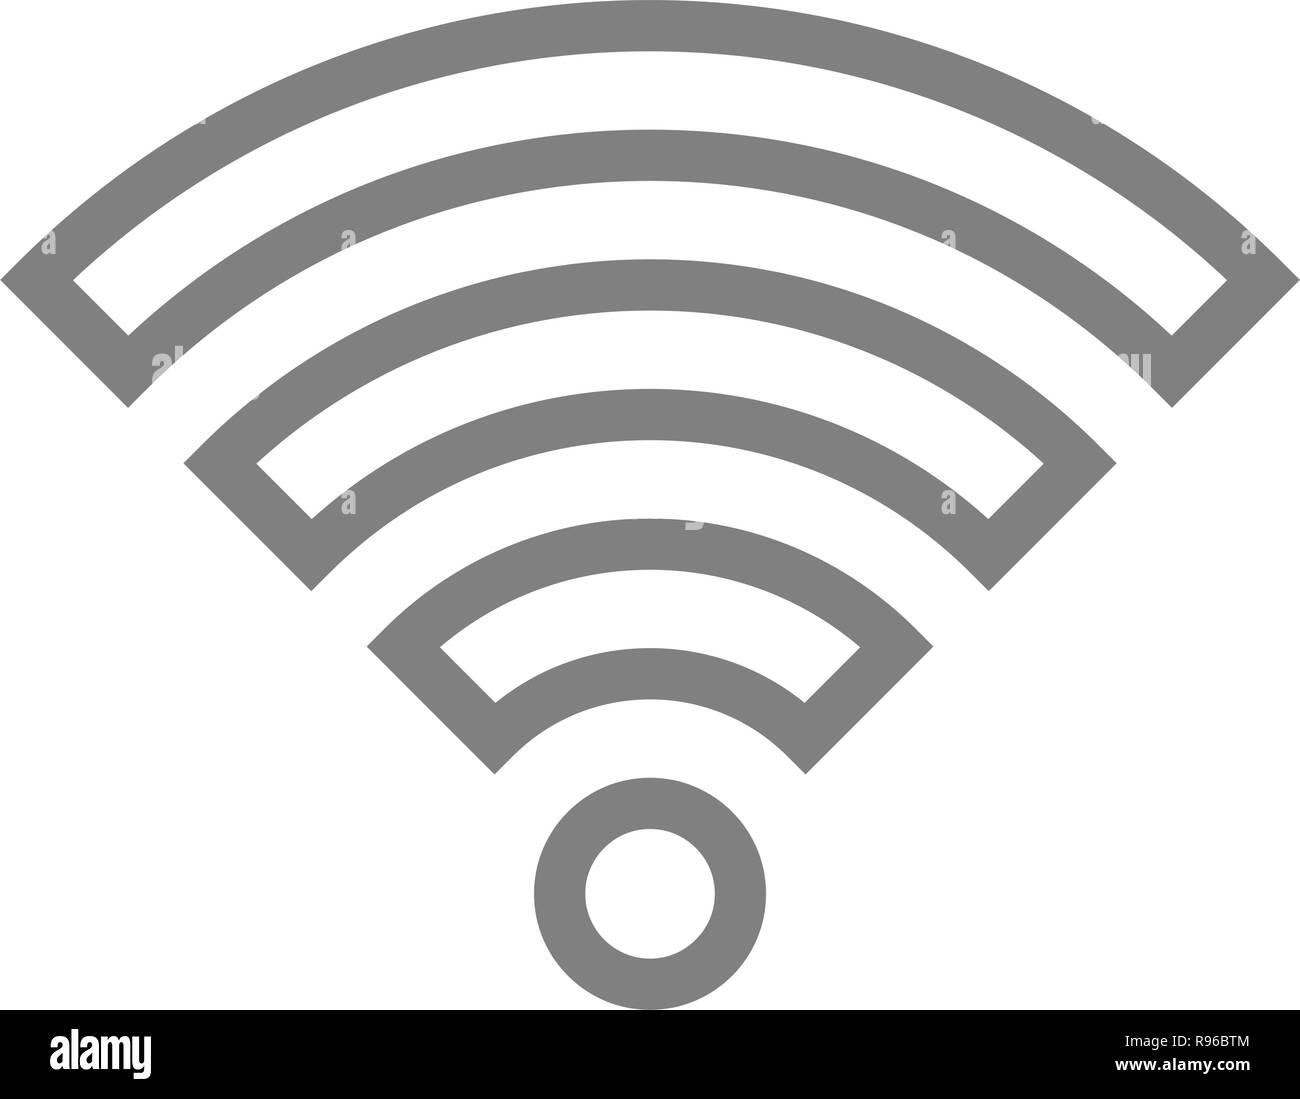 Wifi symbol icon - medium gray outlined, isolated - vector illustration Stock Vector